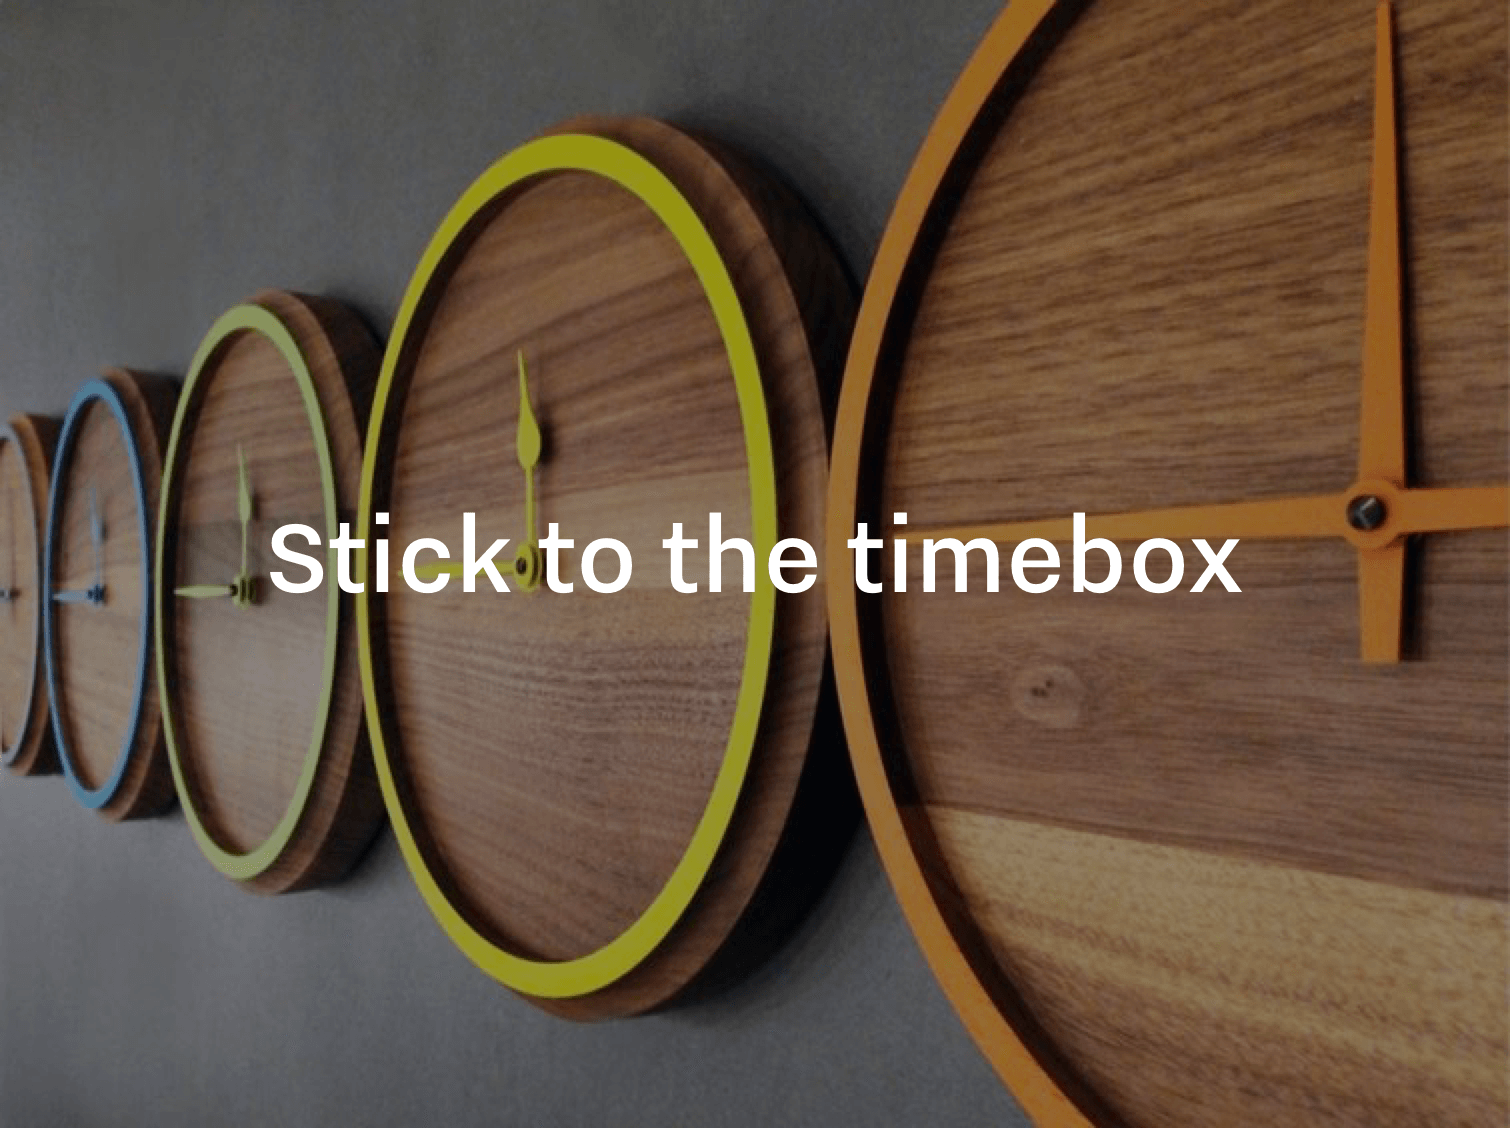 Stick to the timebox